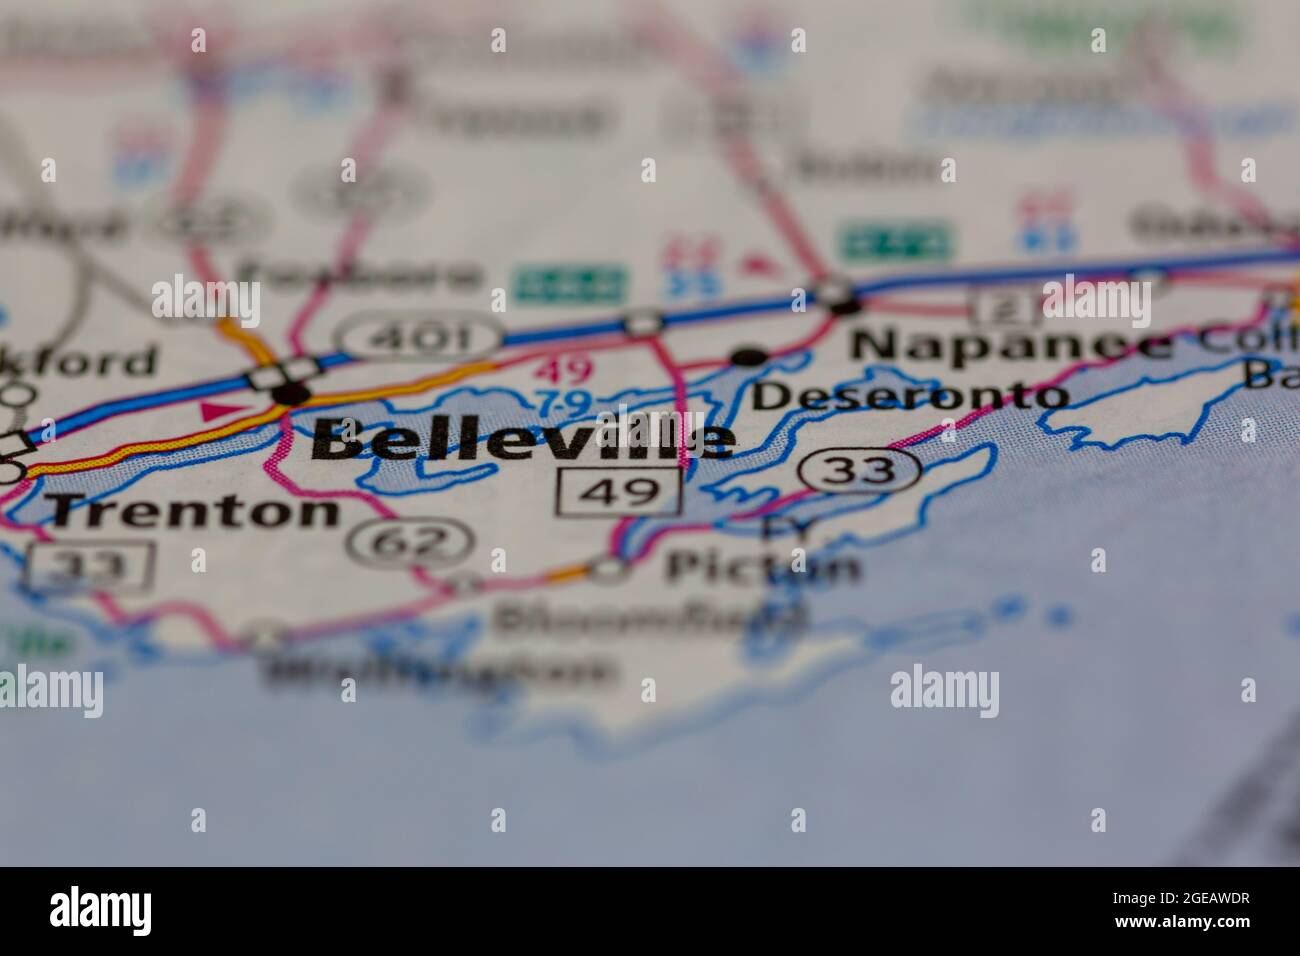 Belleville Ontario Canada shown on a road map or Geography map Stock Photo